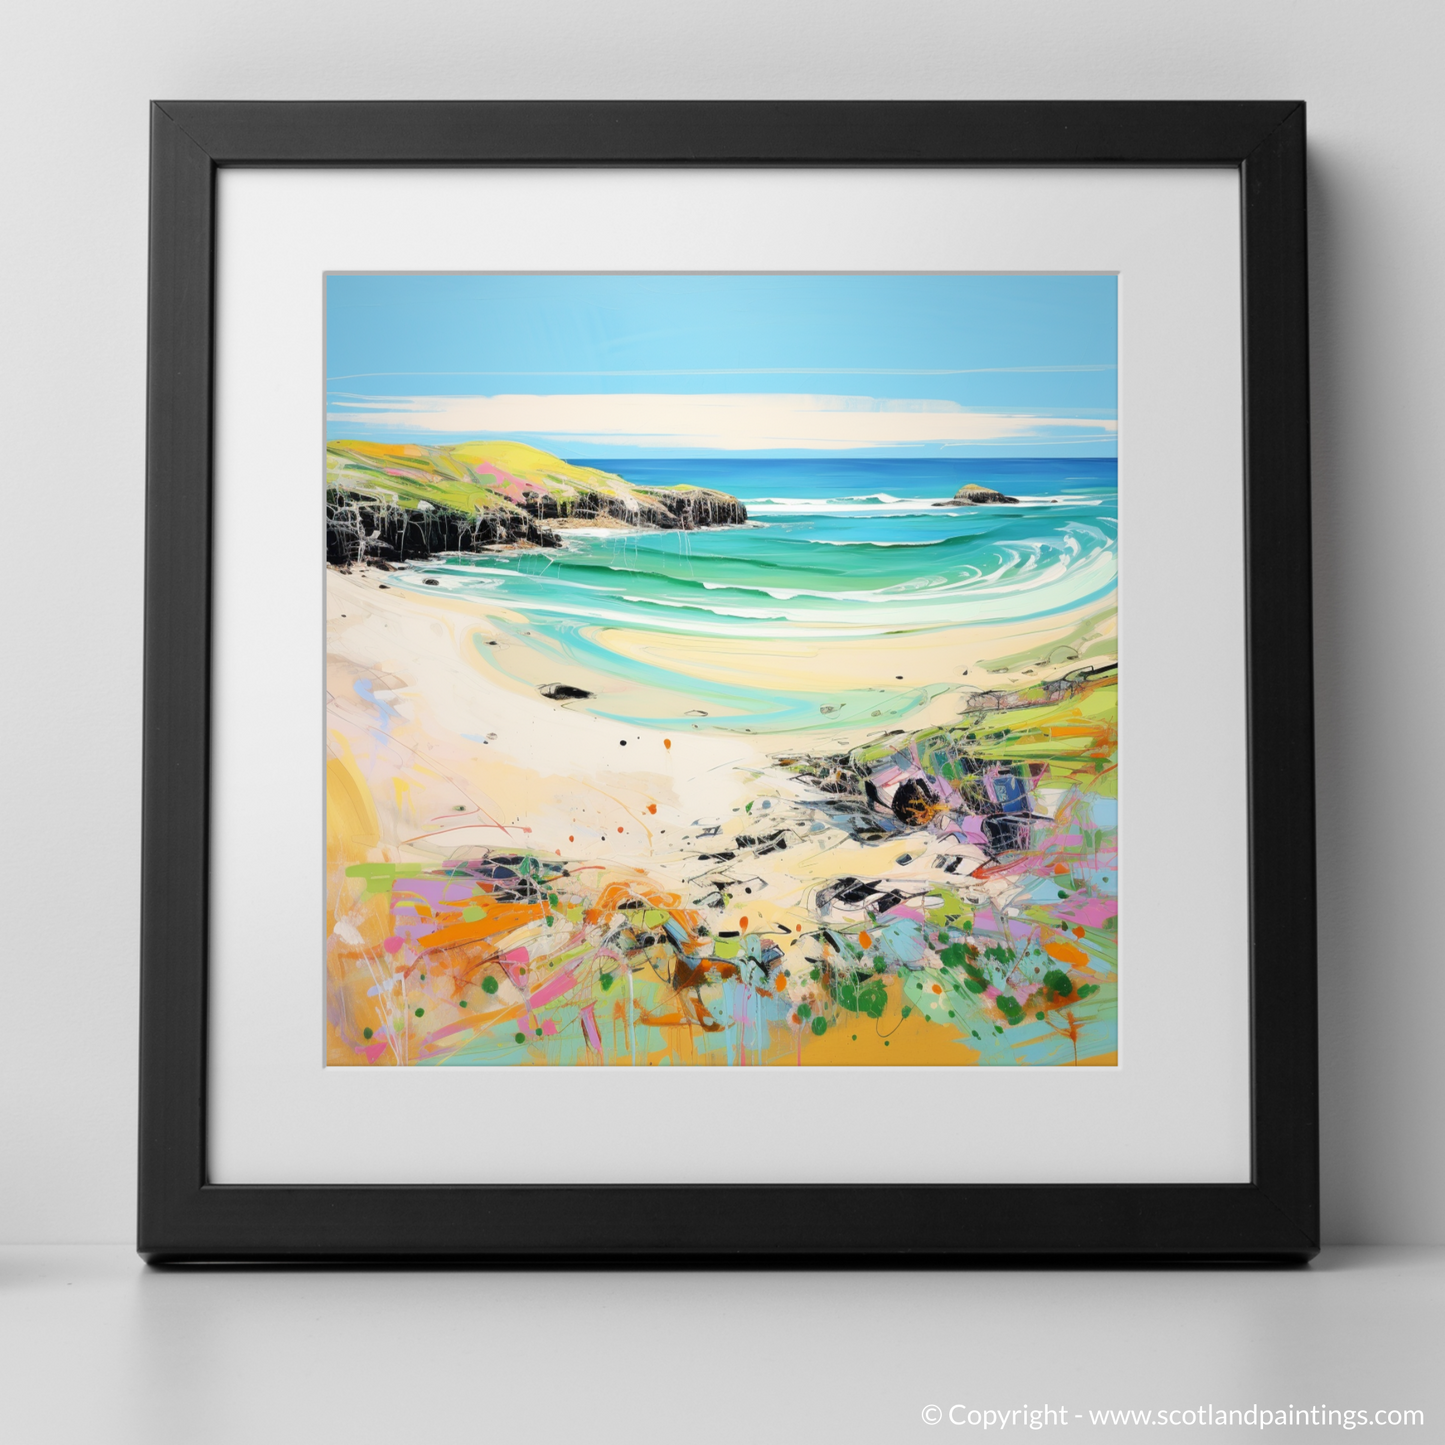 Art Print of Durness Beach, Sutherland in summer with a black frame